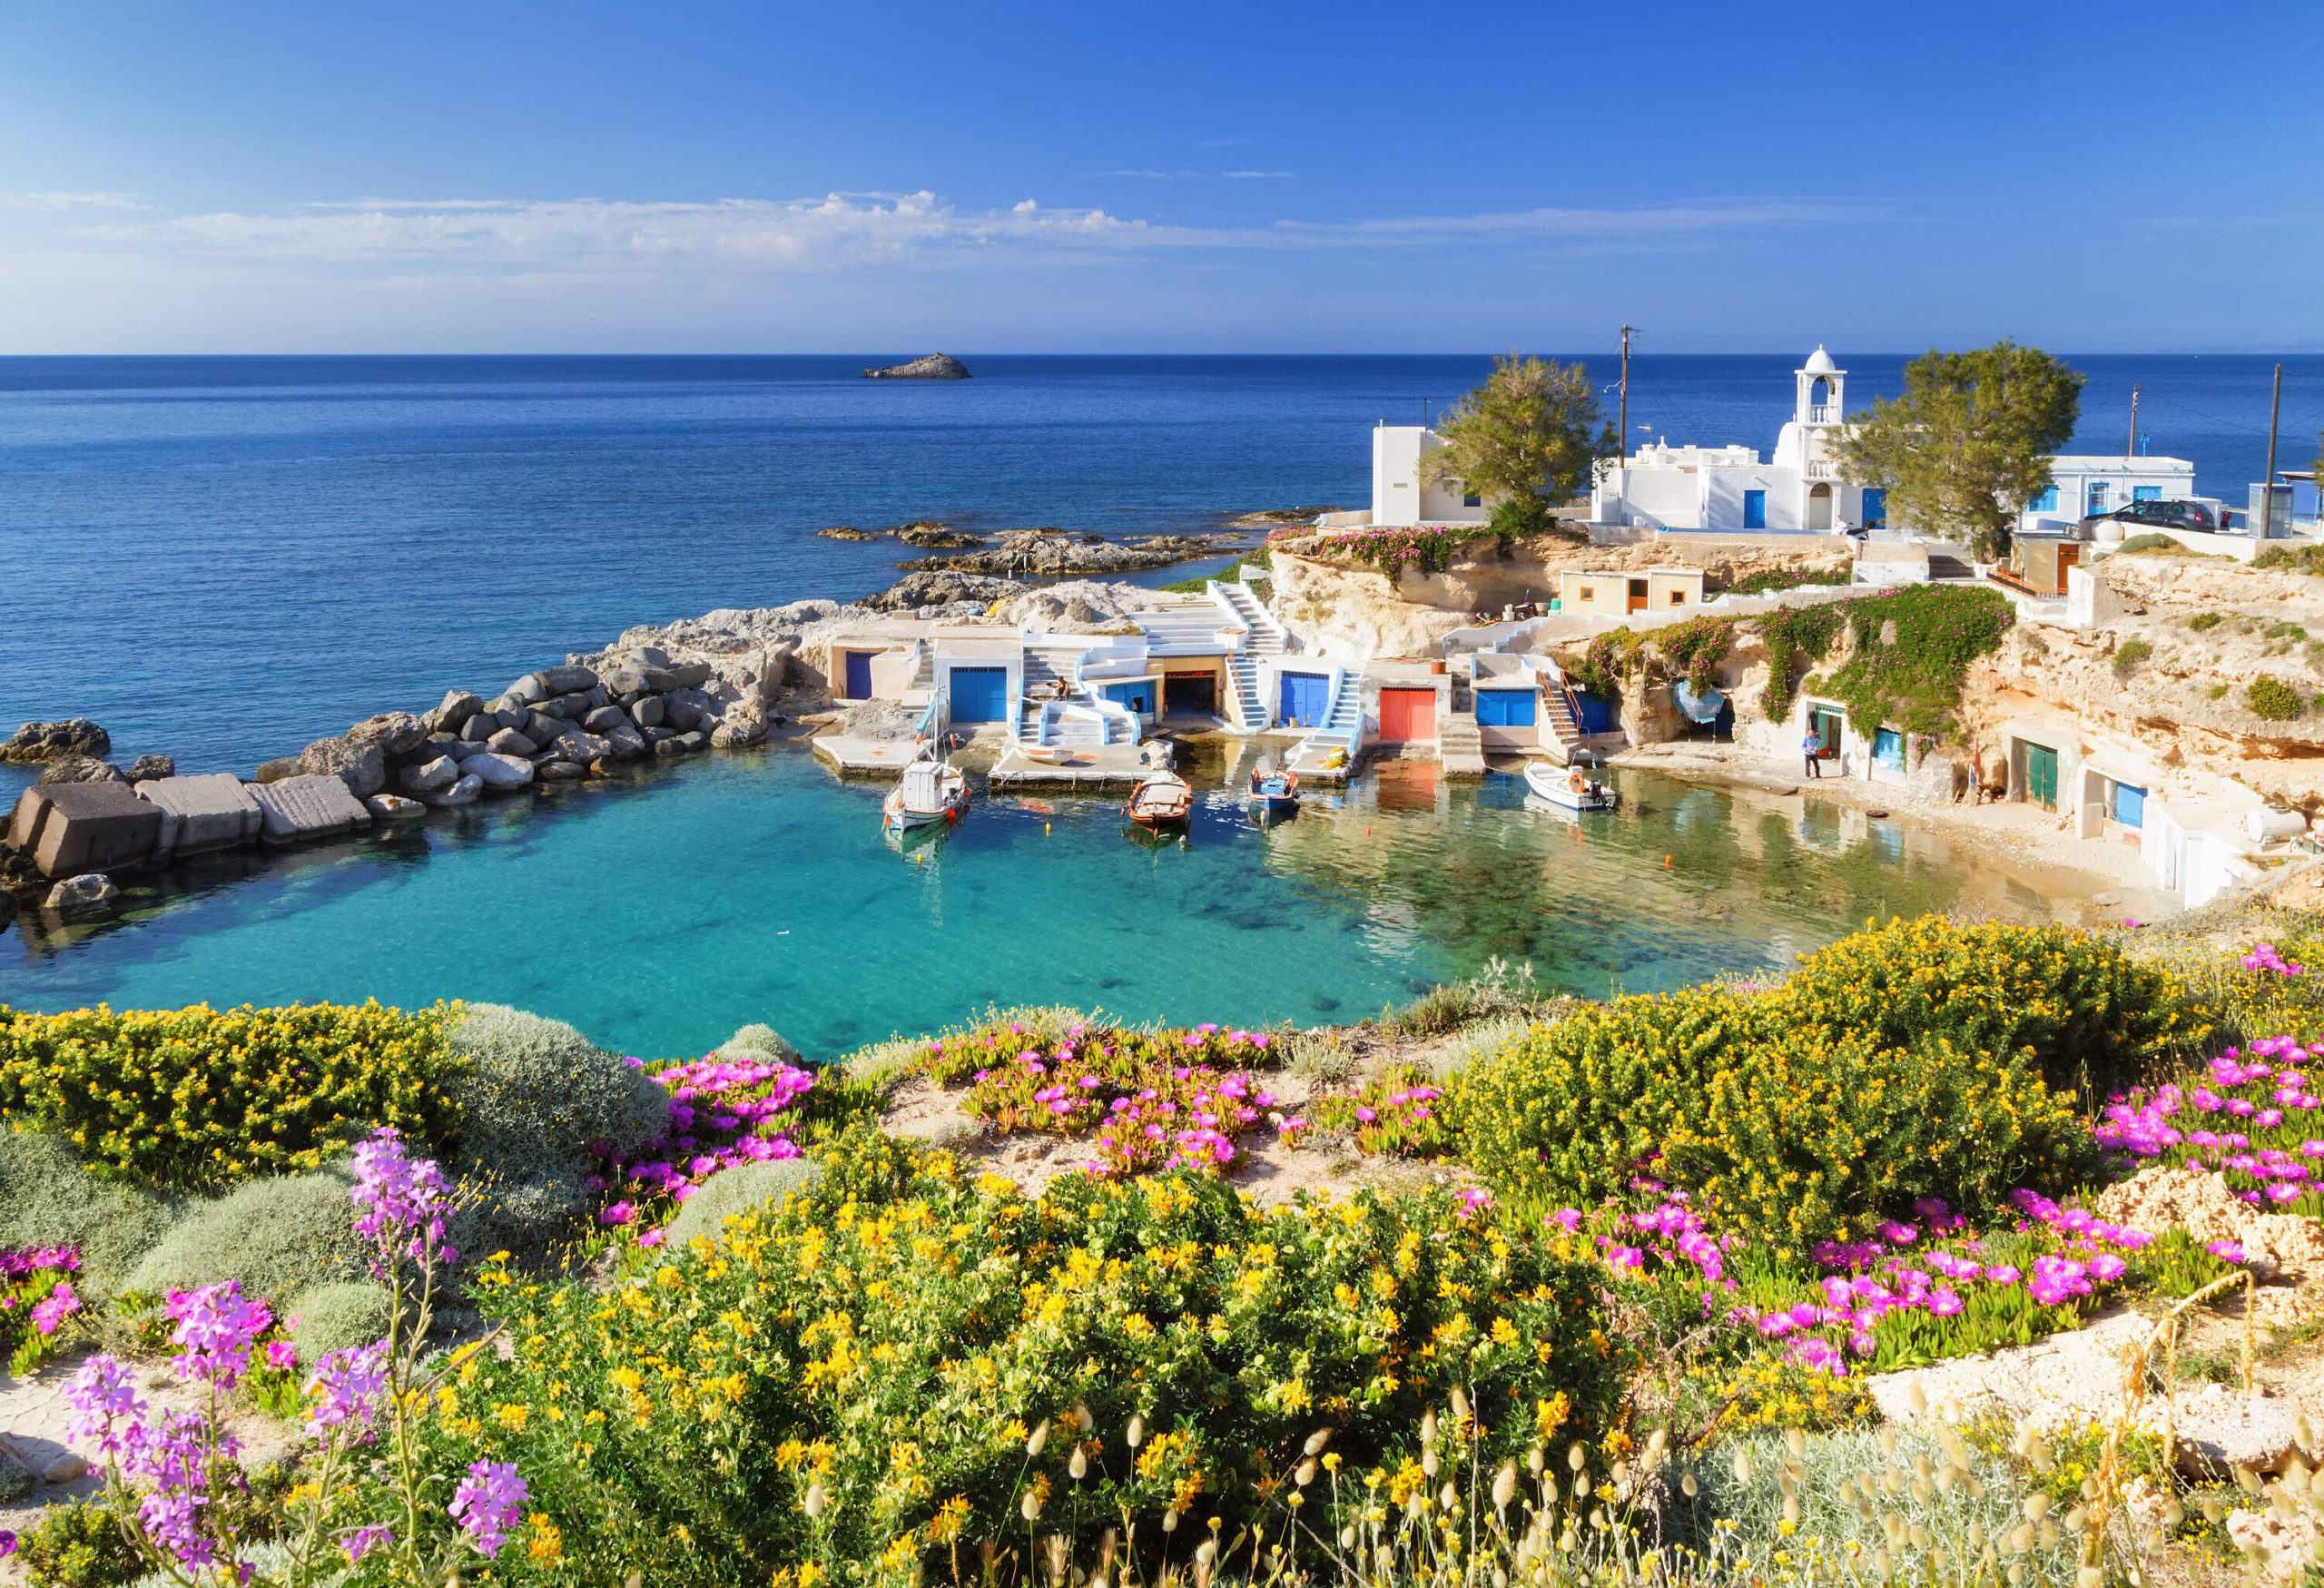 A settlement tucked within the rocky terrain surrounding a body of water, with a blue sea visible in the background and colourful plants in the foreground.